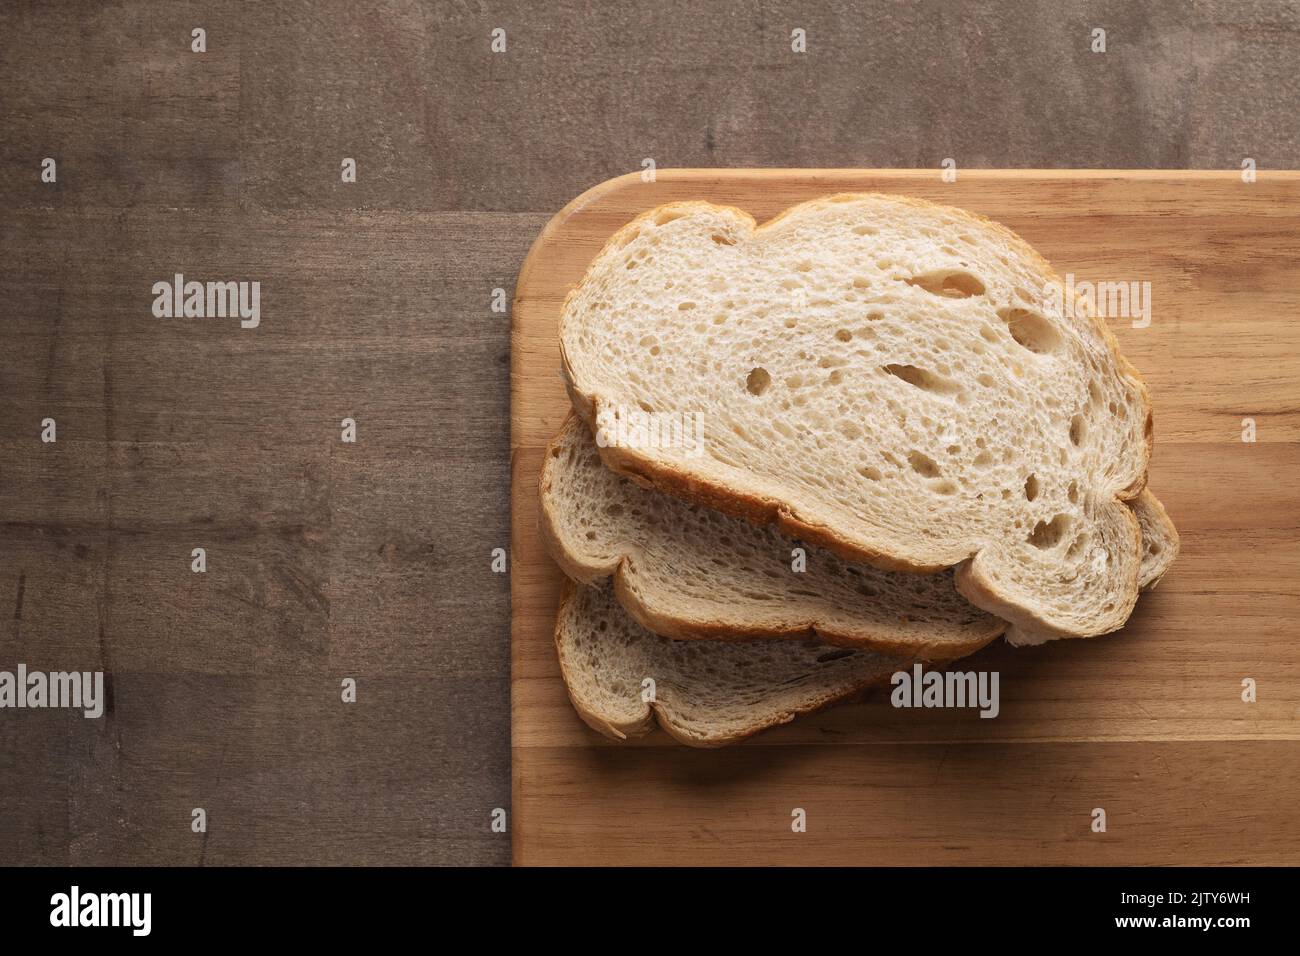 Sliced rye bread on cutting board with copy space Stock Photo